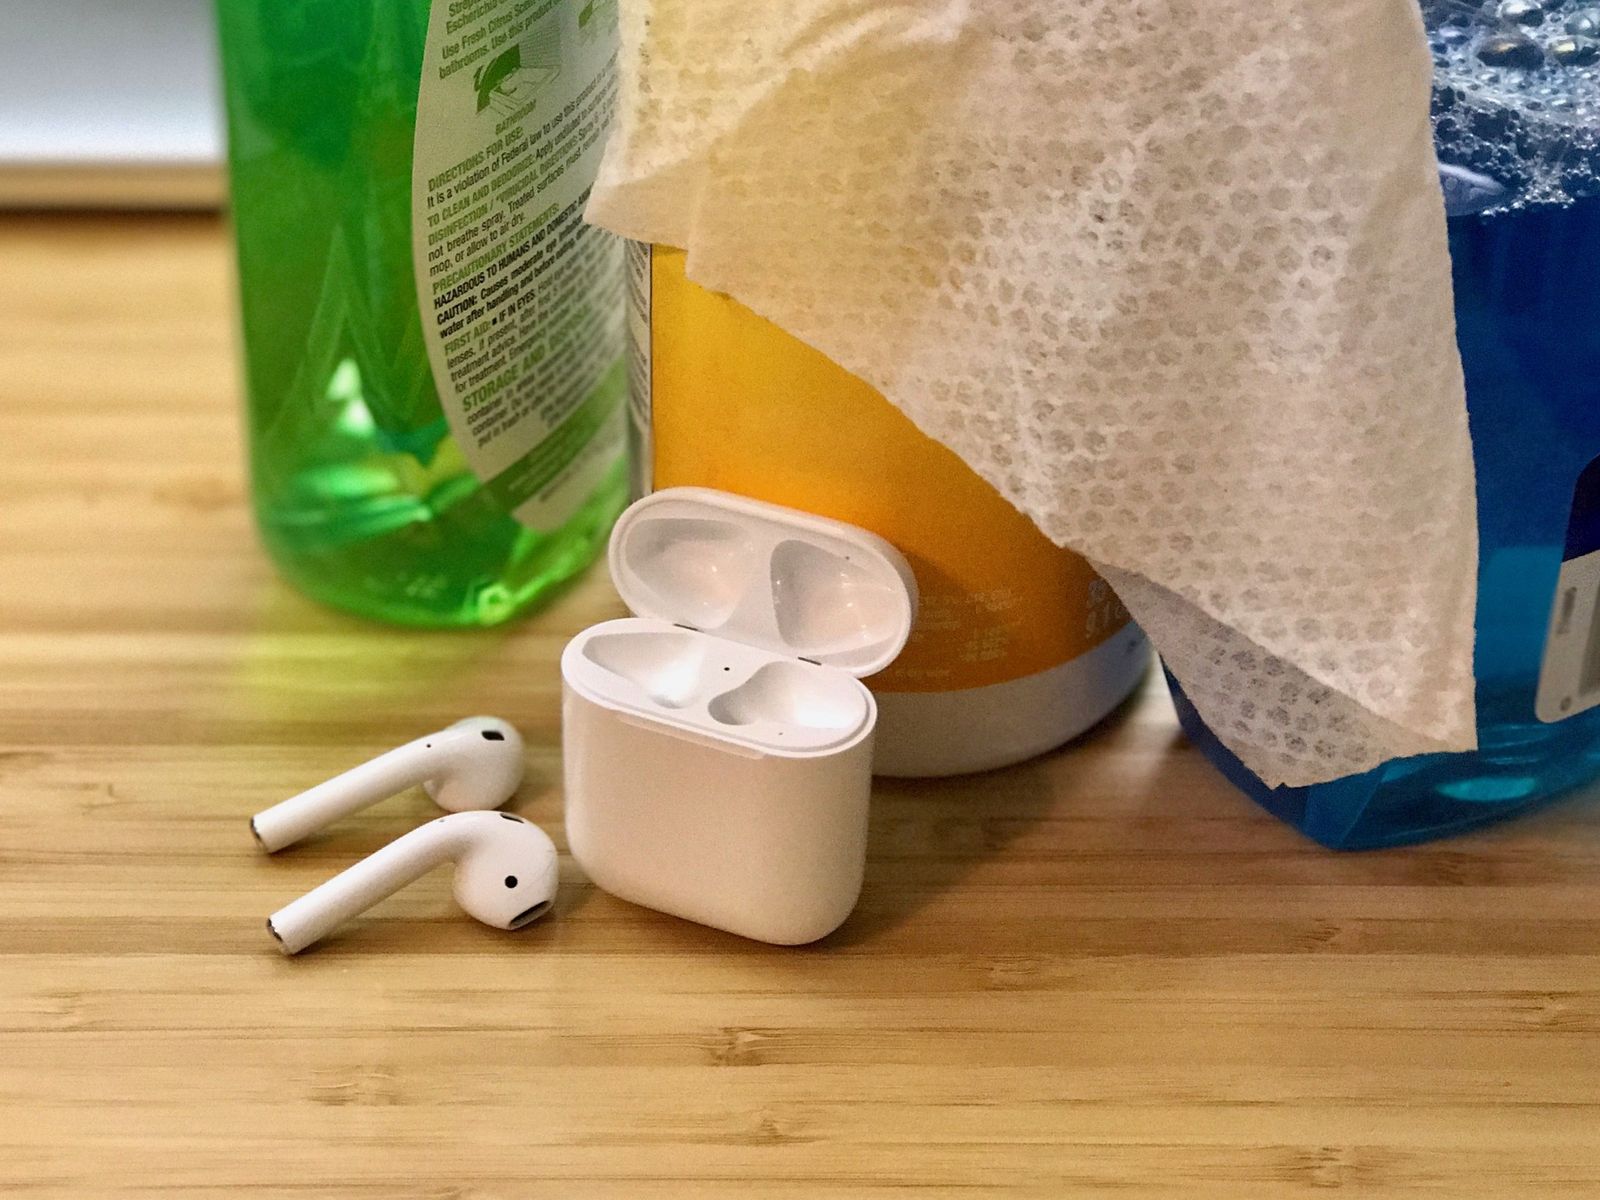 AirPods rest in front of various cleaning products.